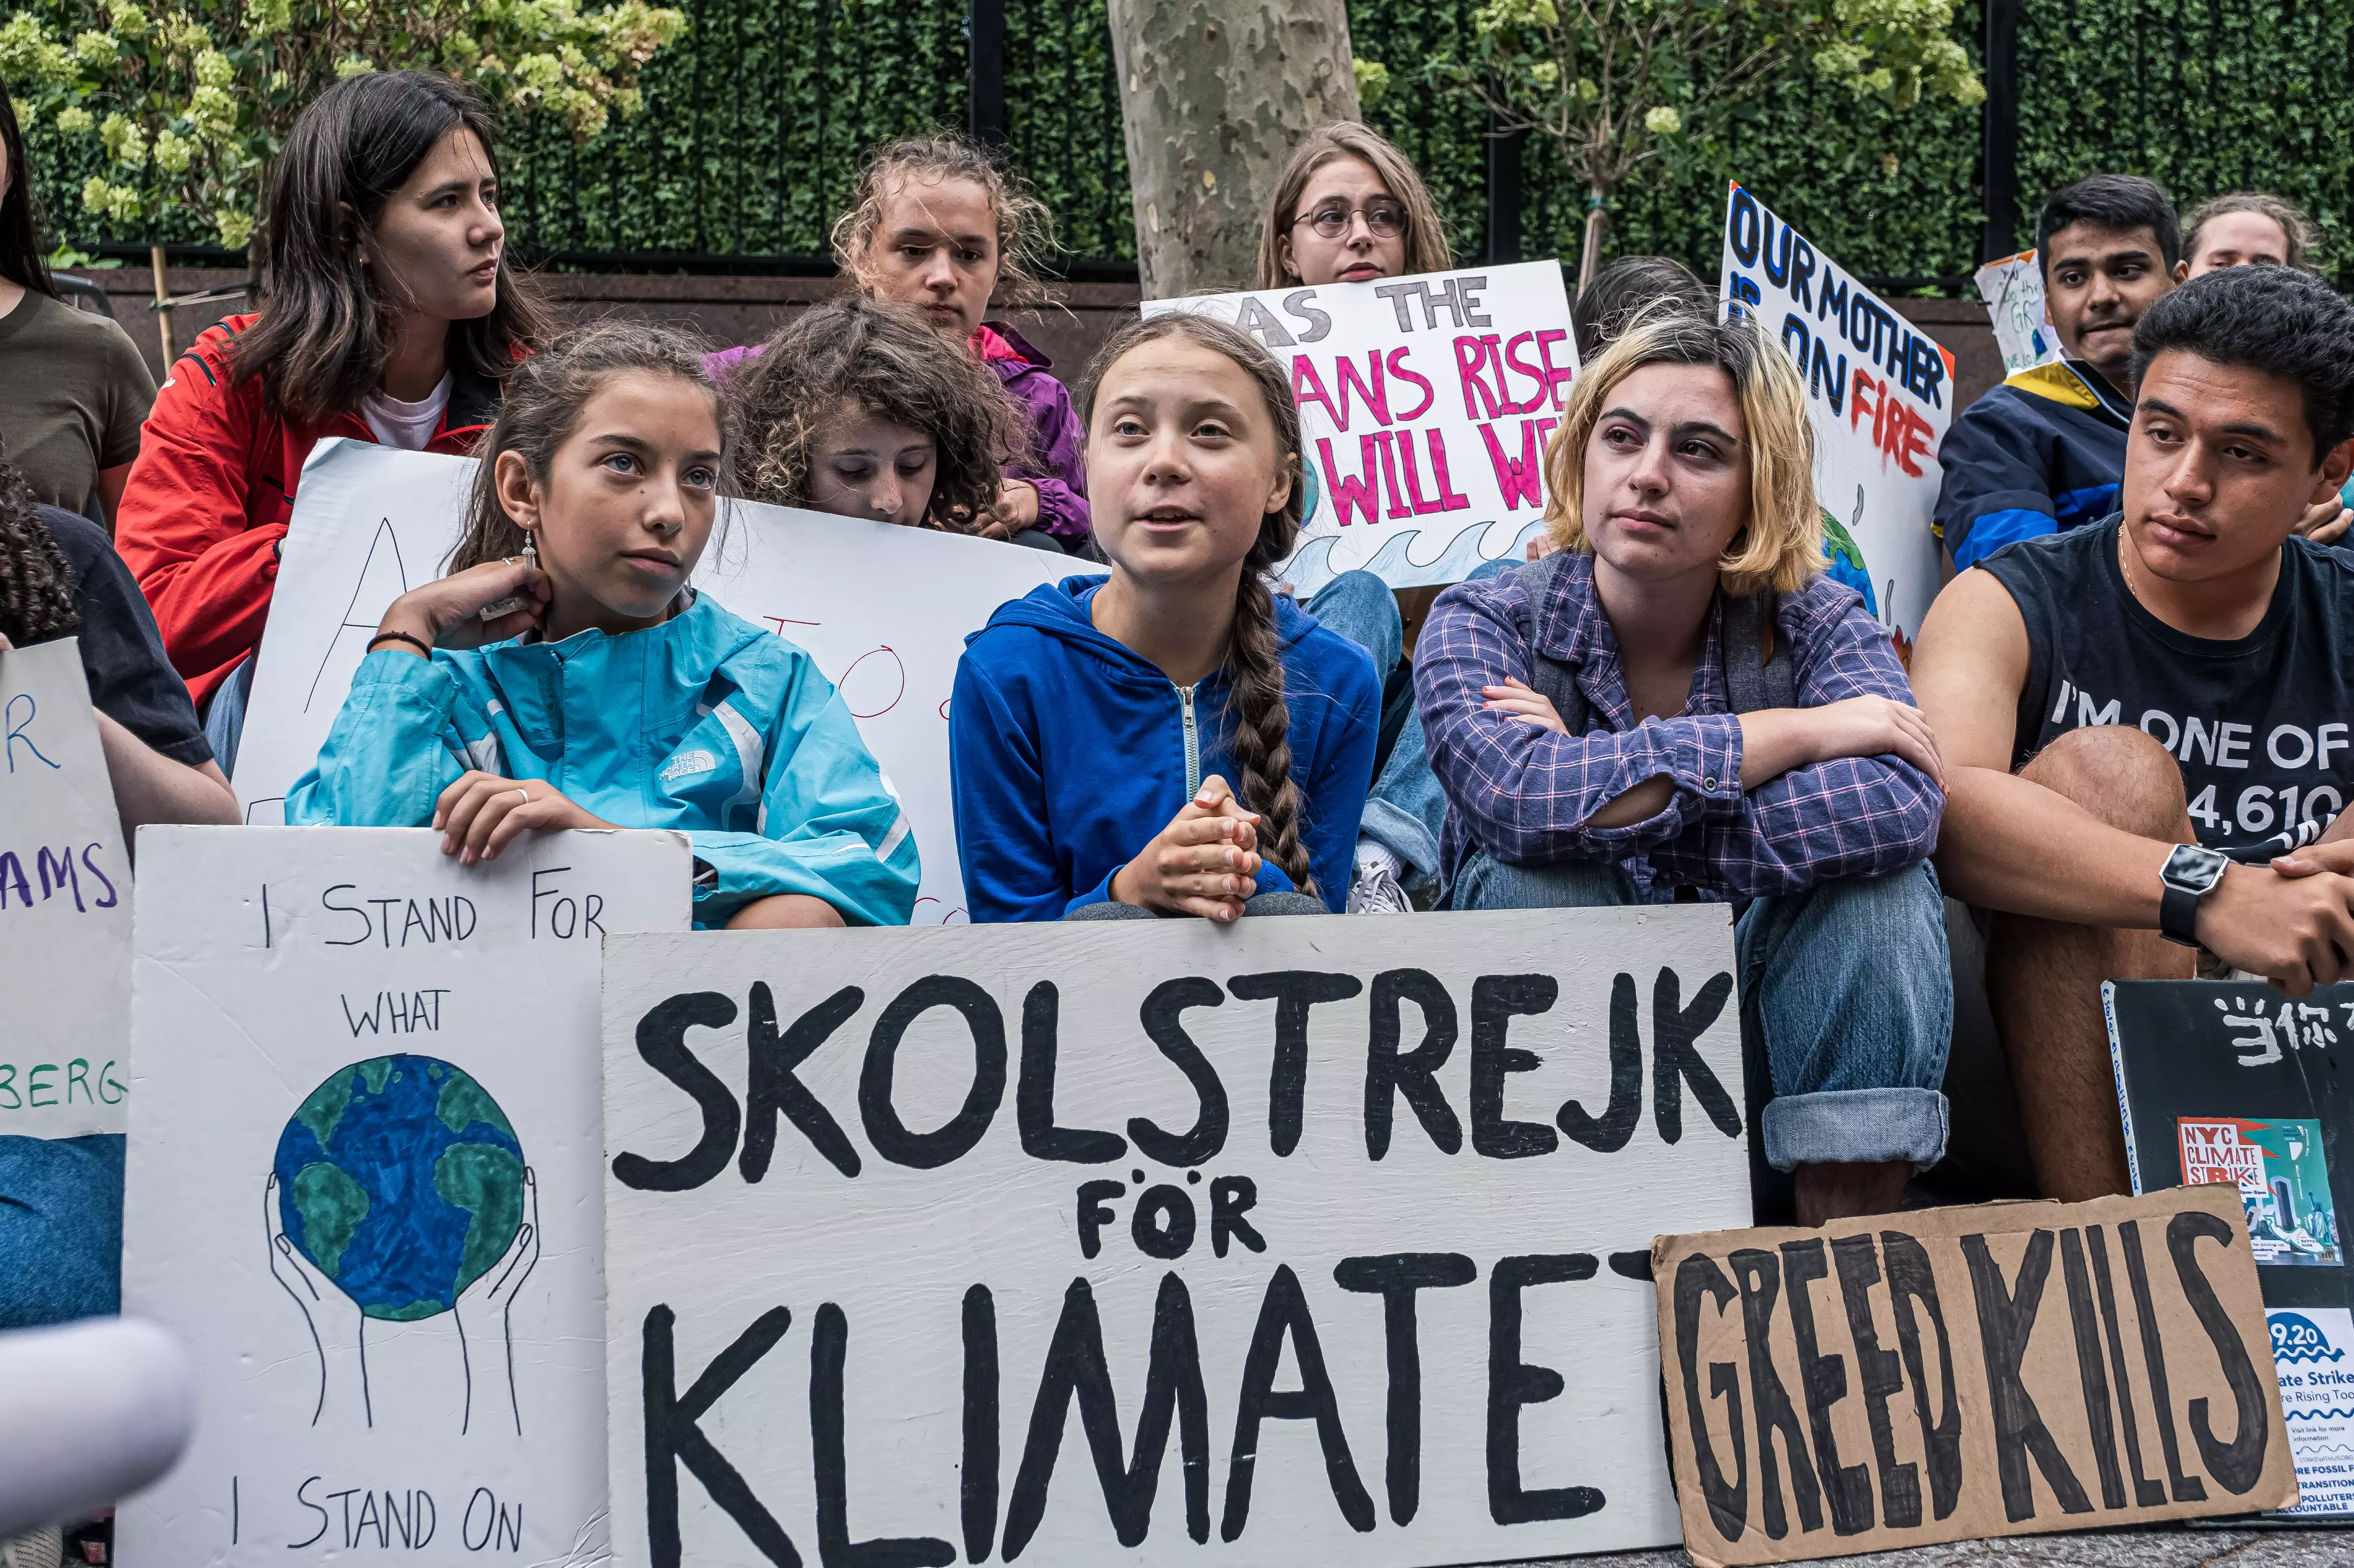 Thunberg has been praised for her stand against climate change which began with strikes outside the Swedish Parliament last year.